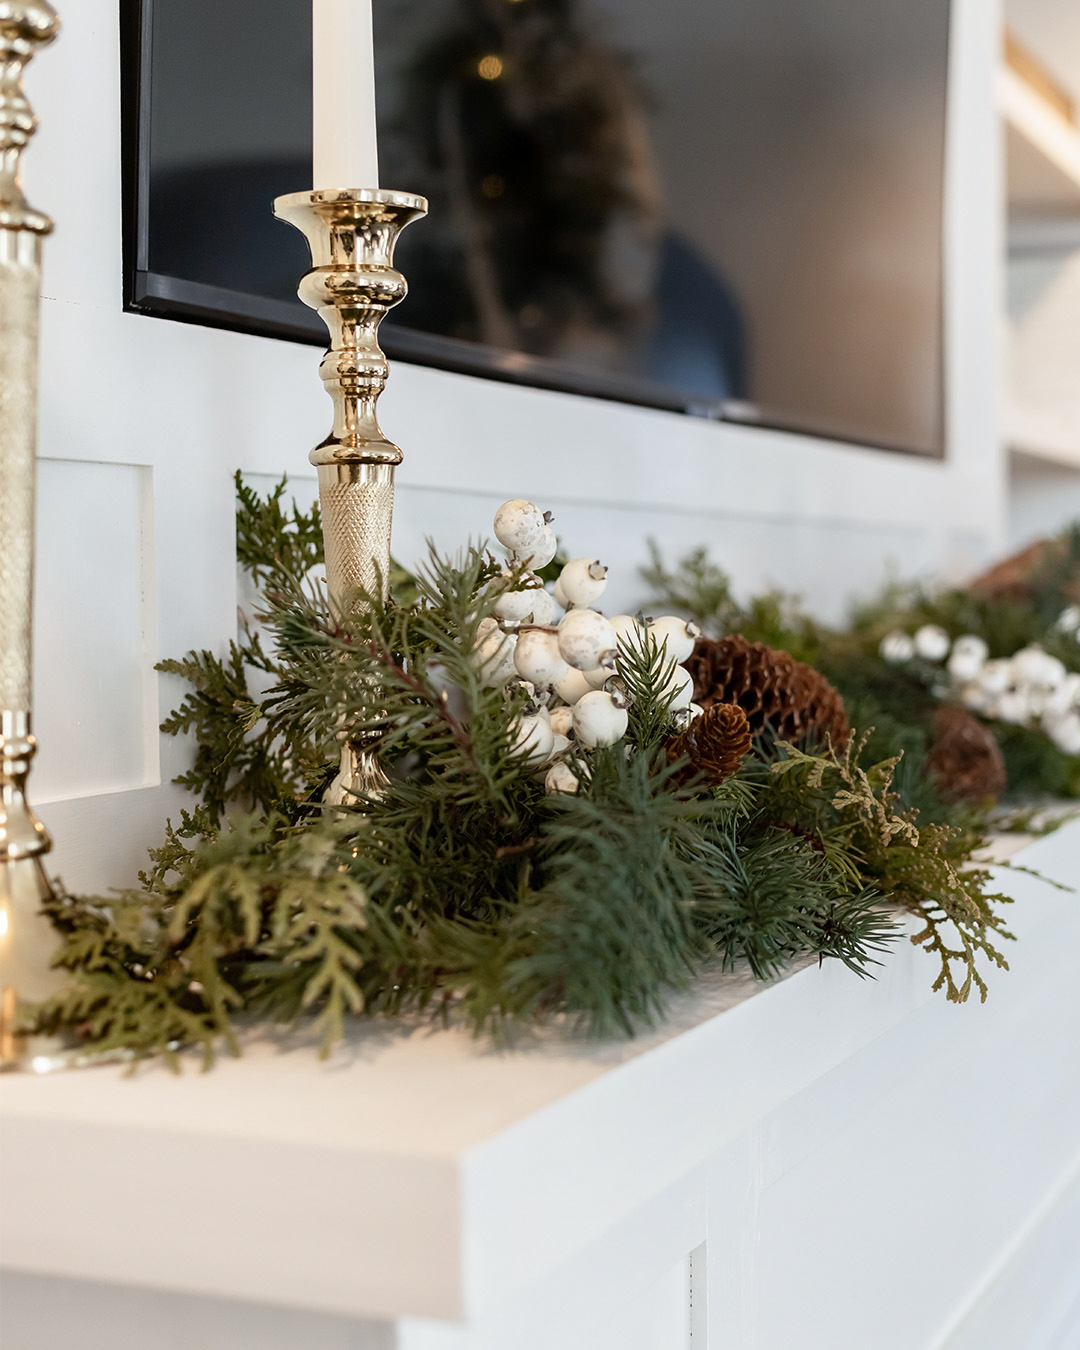 I love using natural Christmas decor as much as possible. It's environmentally friendly and compostable! Here are some favourite ideas for decorating with foraged greenery for Christmas.